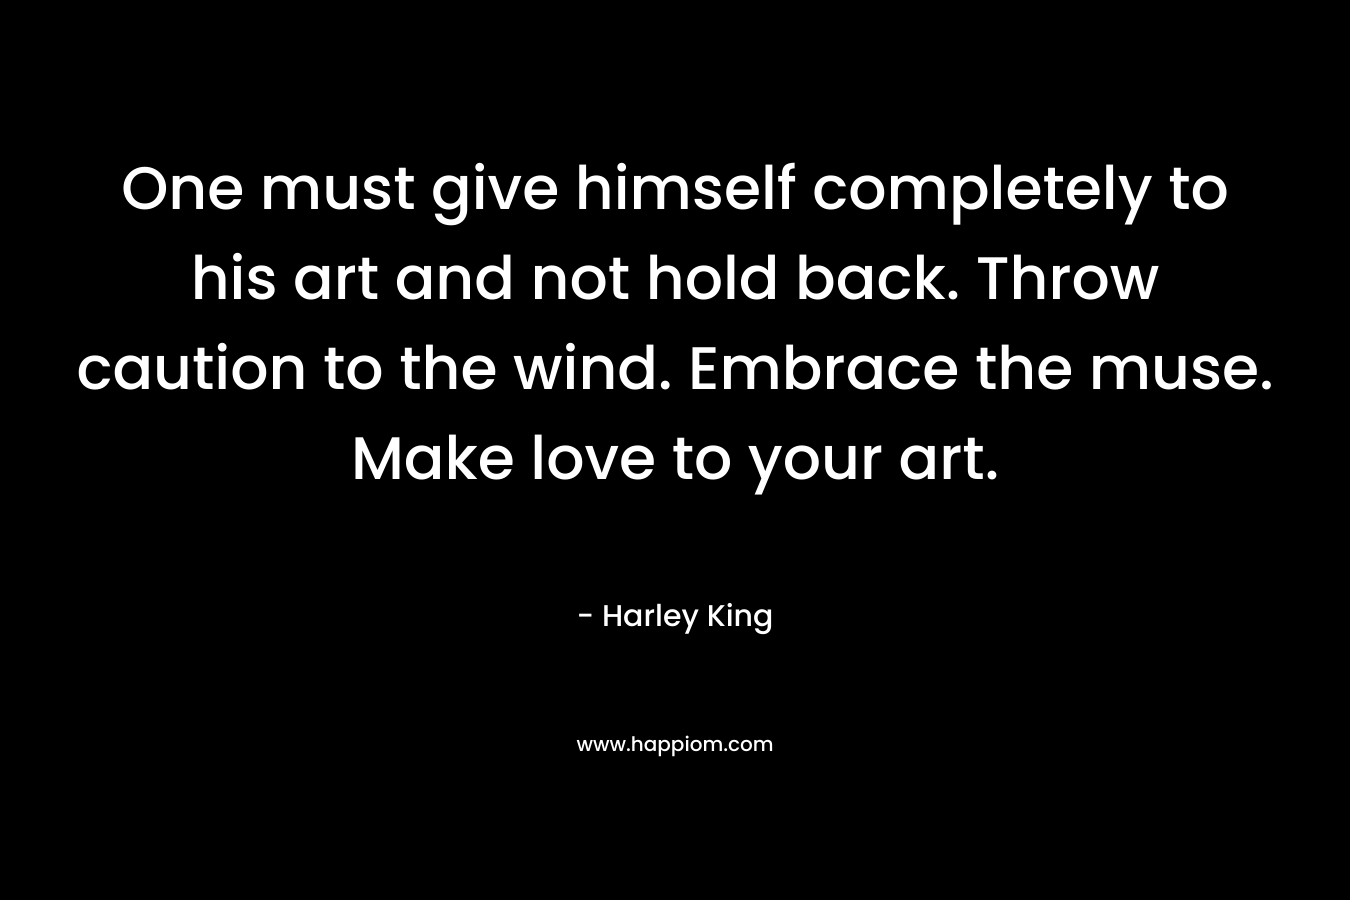 One must give himself completely to his art and not hold back. Throw caution to the wind. Embrace the muse. Make love to your art.